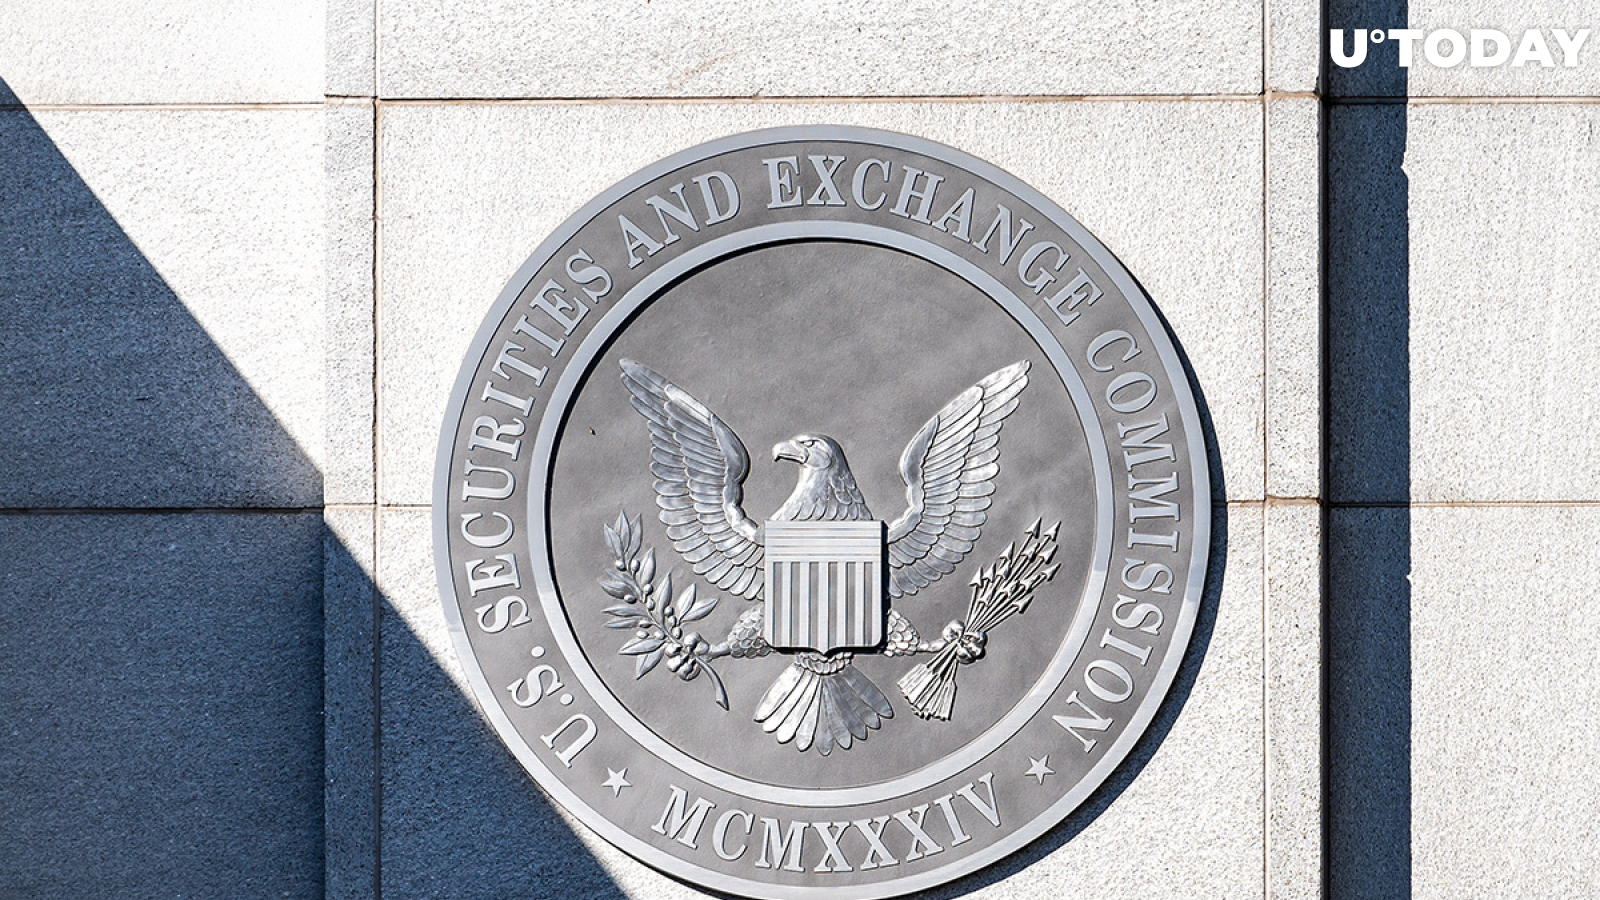 SEC Issues Investor Alert to Warn About Funds That Have Exposure to Bitcoin Futures